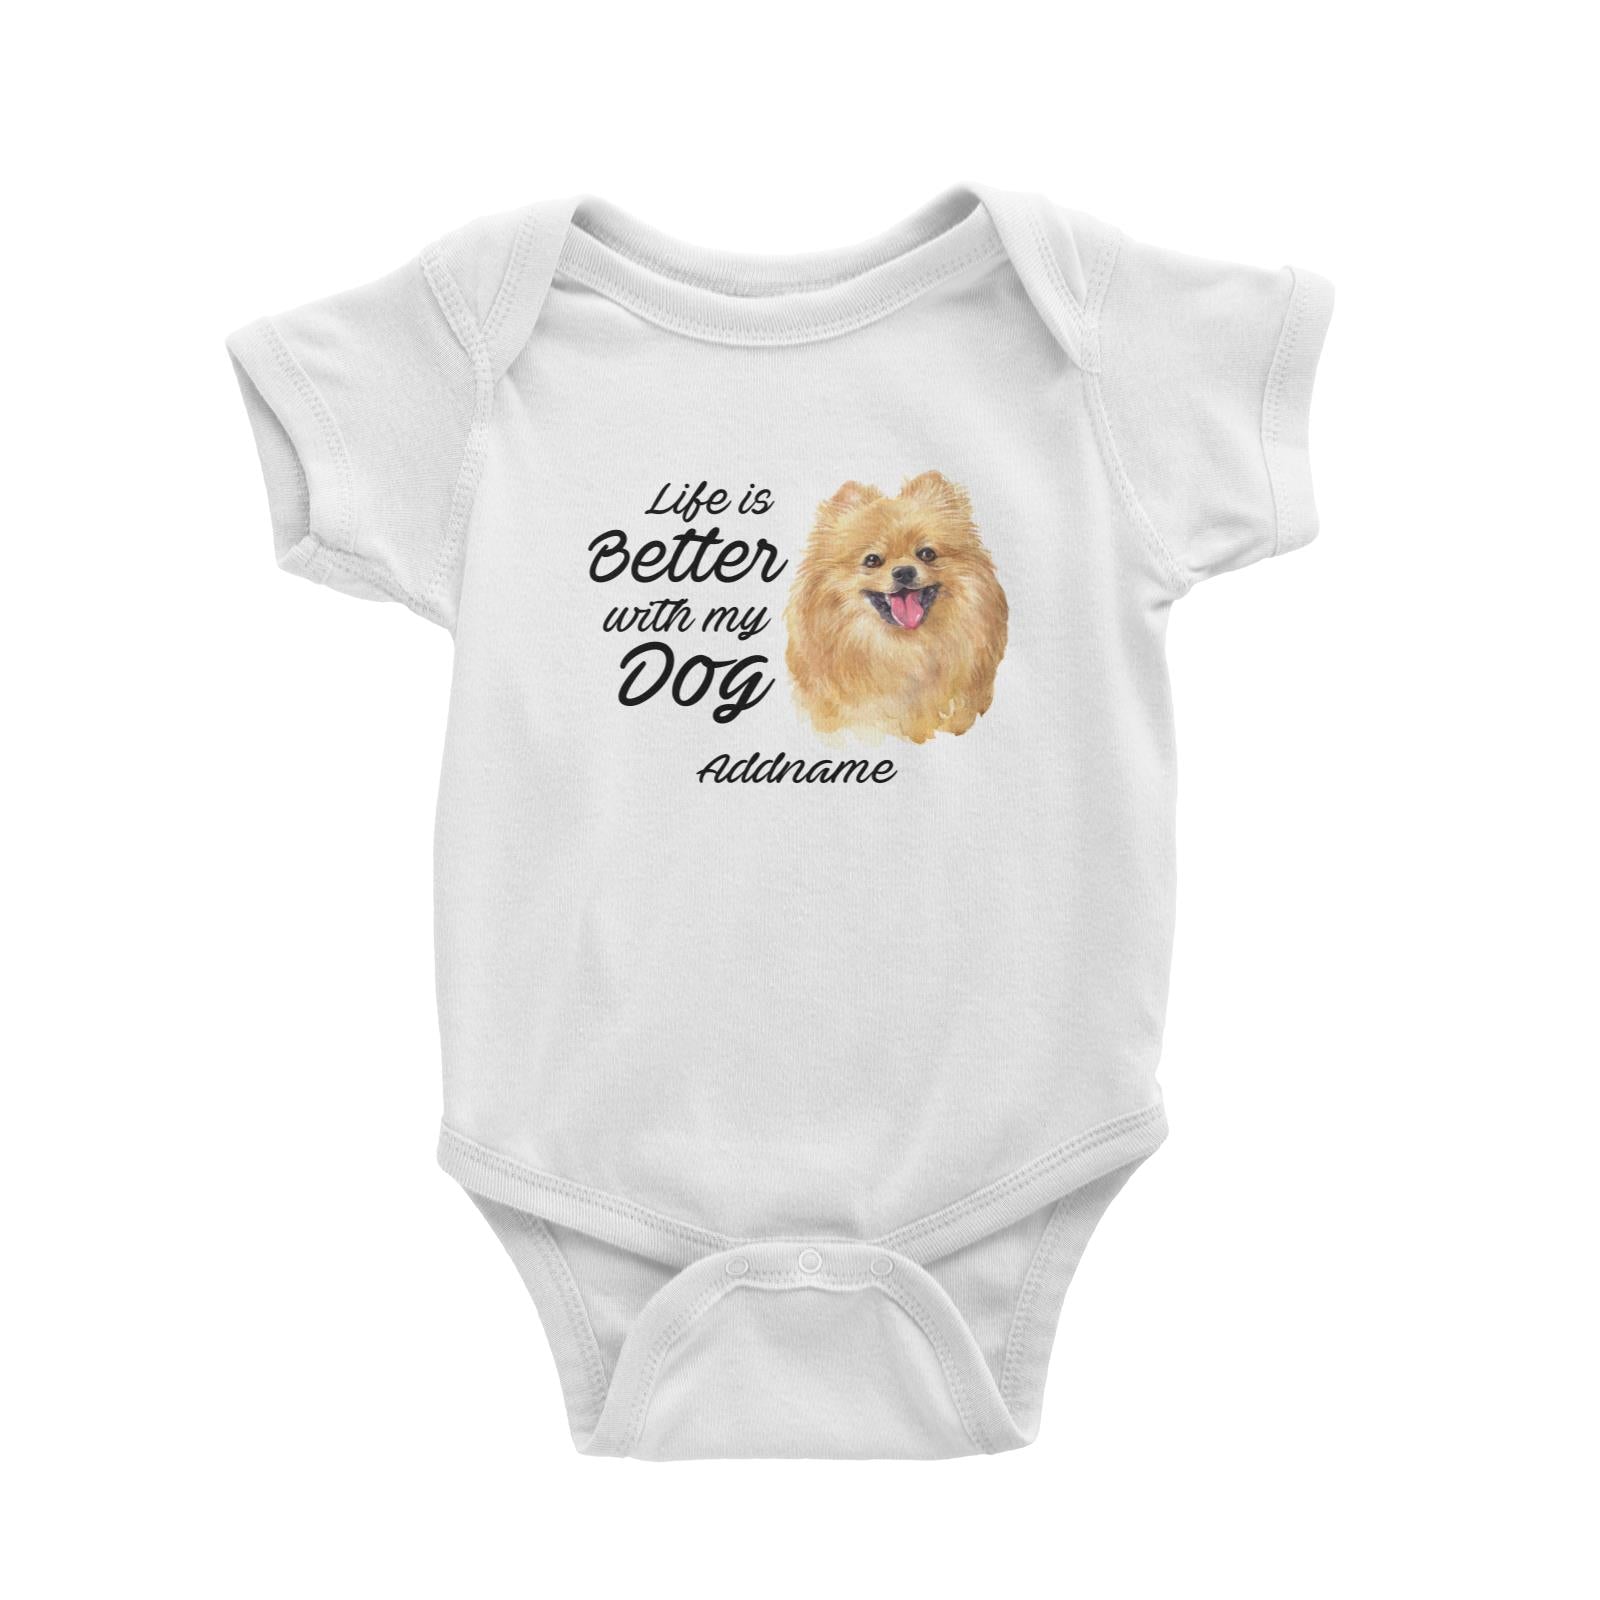 Watercolor Life is Better With My Dog Pomeranian Addname Baby Romper